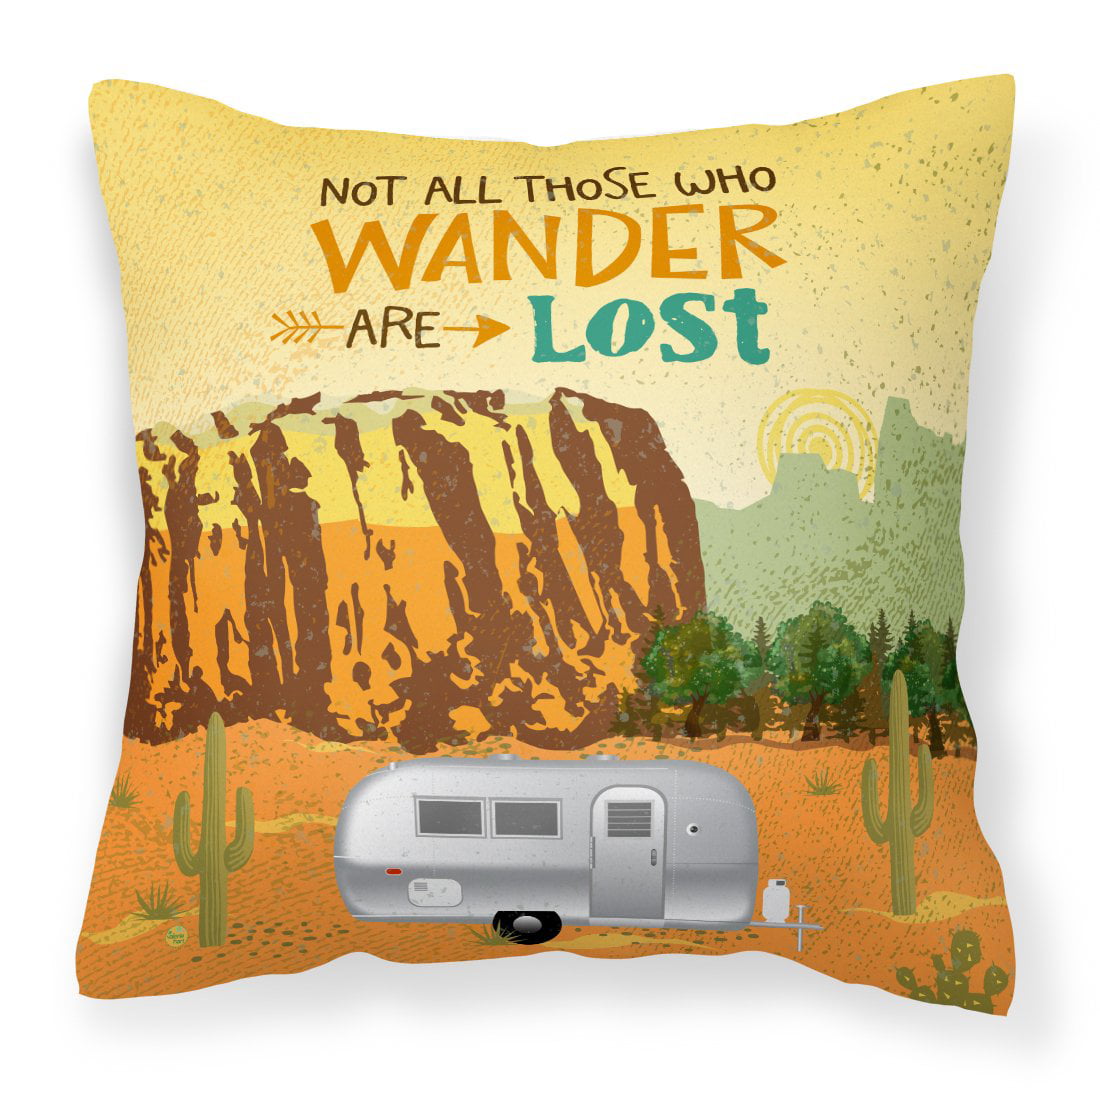 Airstream Camper Camping Wander Fabric Decorative Pillow -  JensenDistributionServices, MI2552585